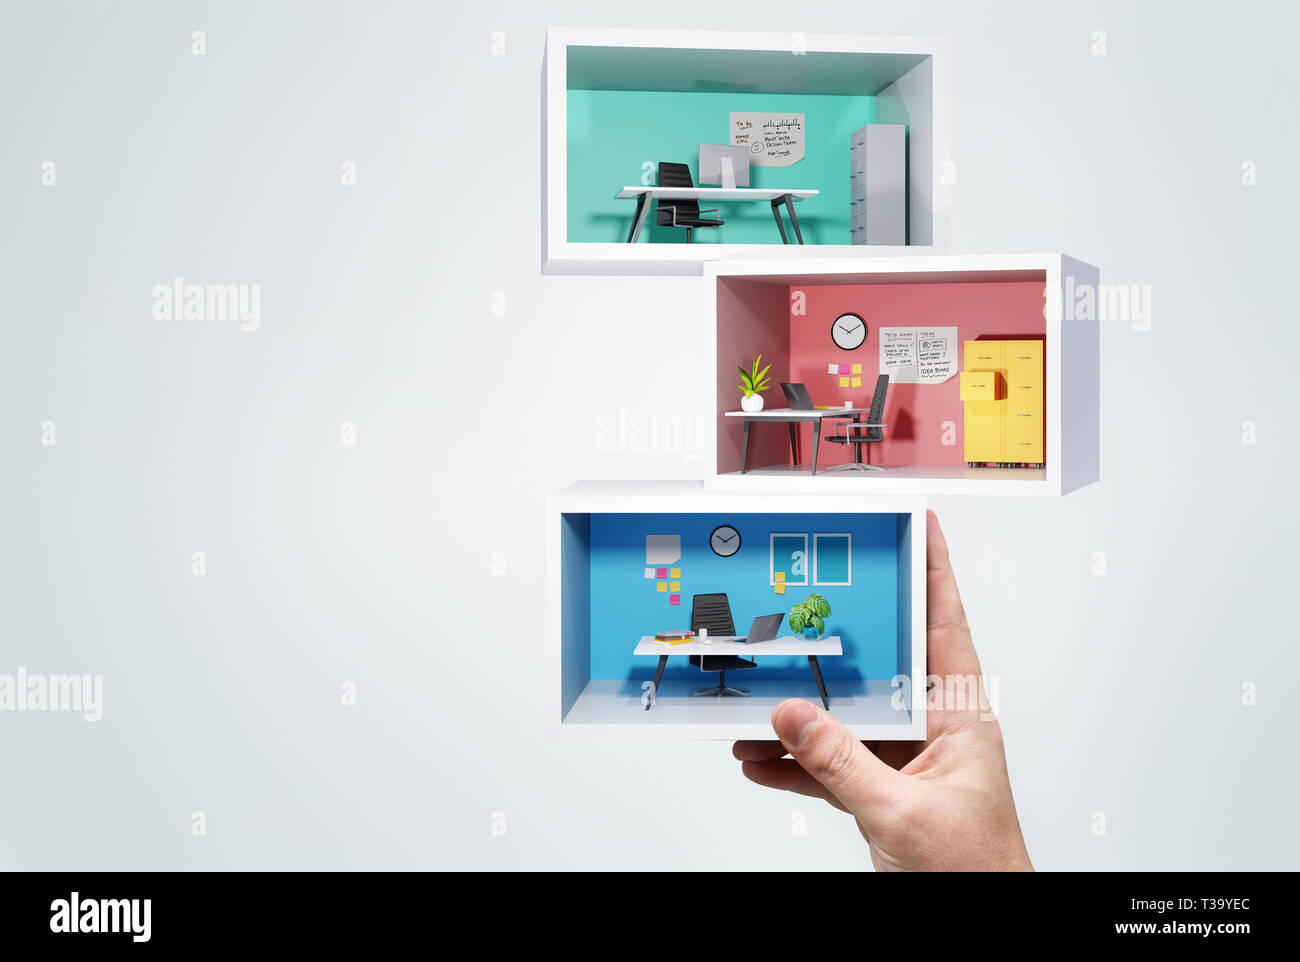 A man Holding up a stack of miniature business office rooms. Business workplace 3D concept illustration. Stock Photo